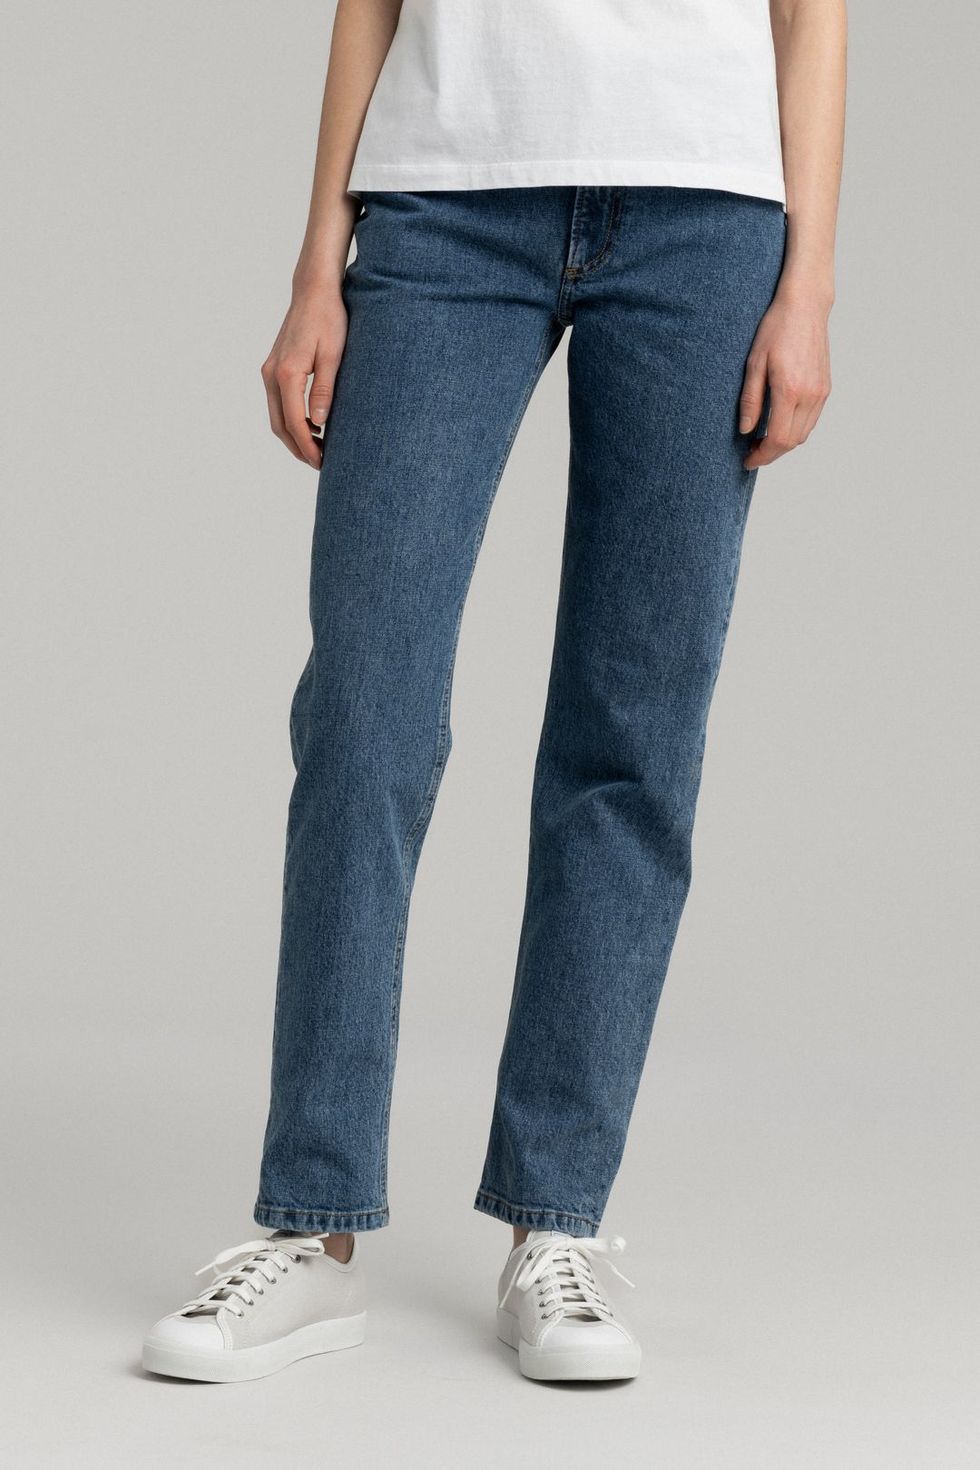 The Standard Jeans